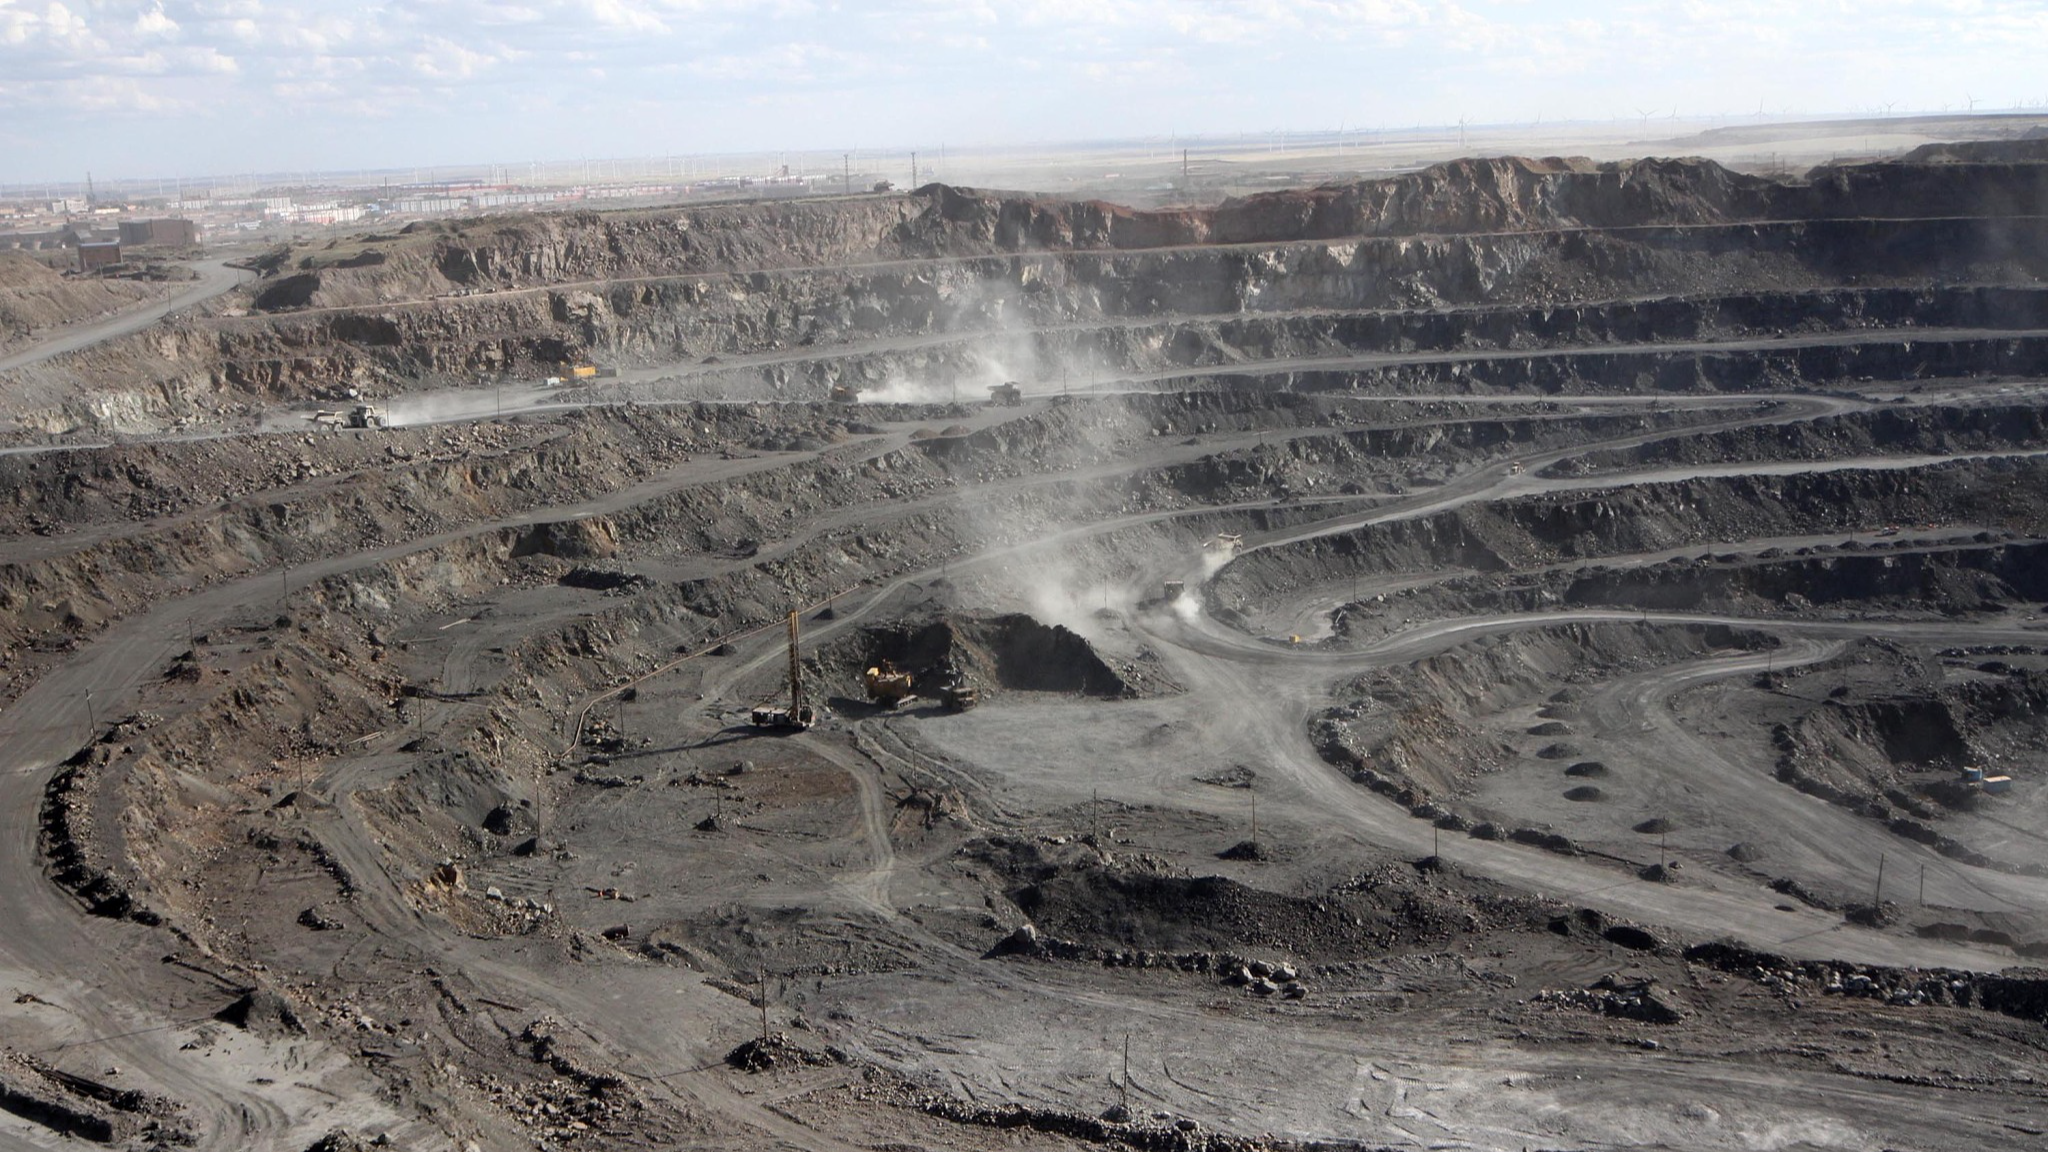 A view of the world's largest rare-earth mine, Bayan Obo deposit, in Baotou City, north China's Inner Mongolia Autonomous Region. /CFP